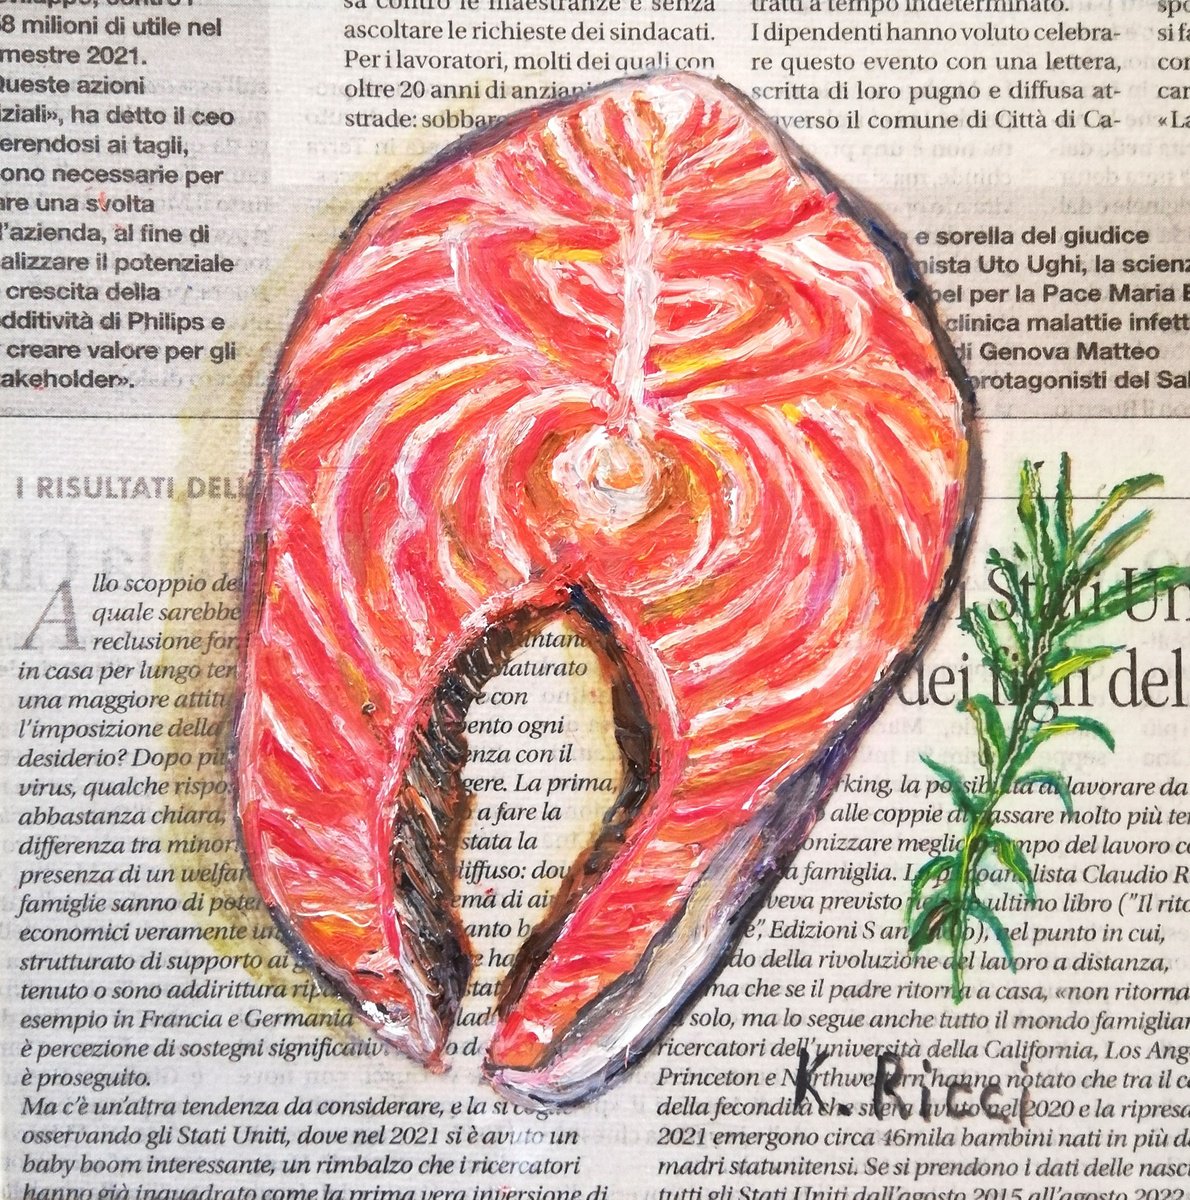 Salmon Slice on Newspaper Original Oil on Canvas Board Painting 6 by 6(15x15cm) by Katia Ricci